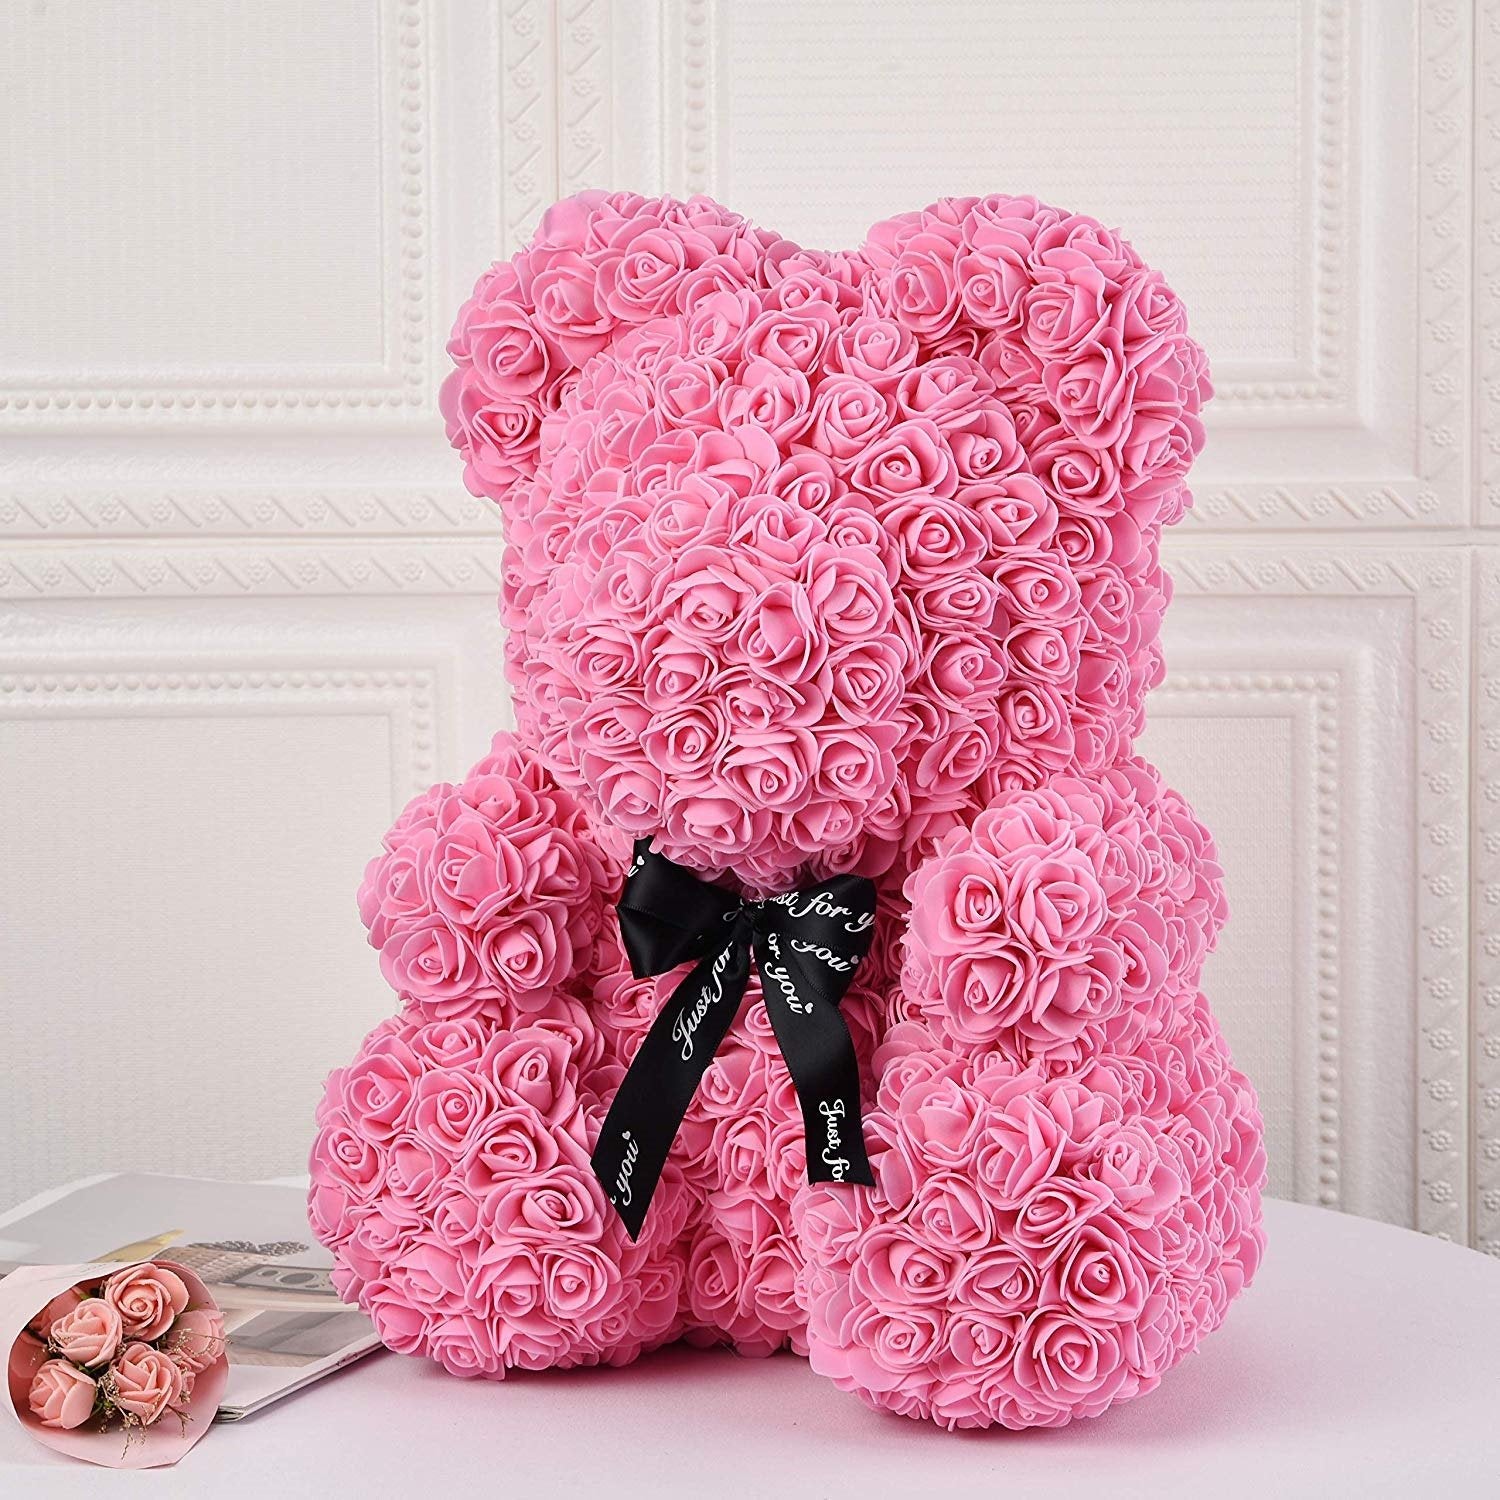 Gorgeous Pink Rose Teddy Bear with Gift Box - 25cm